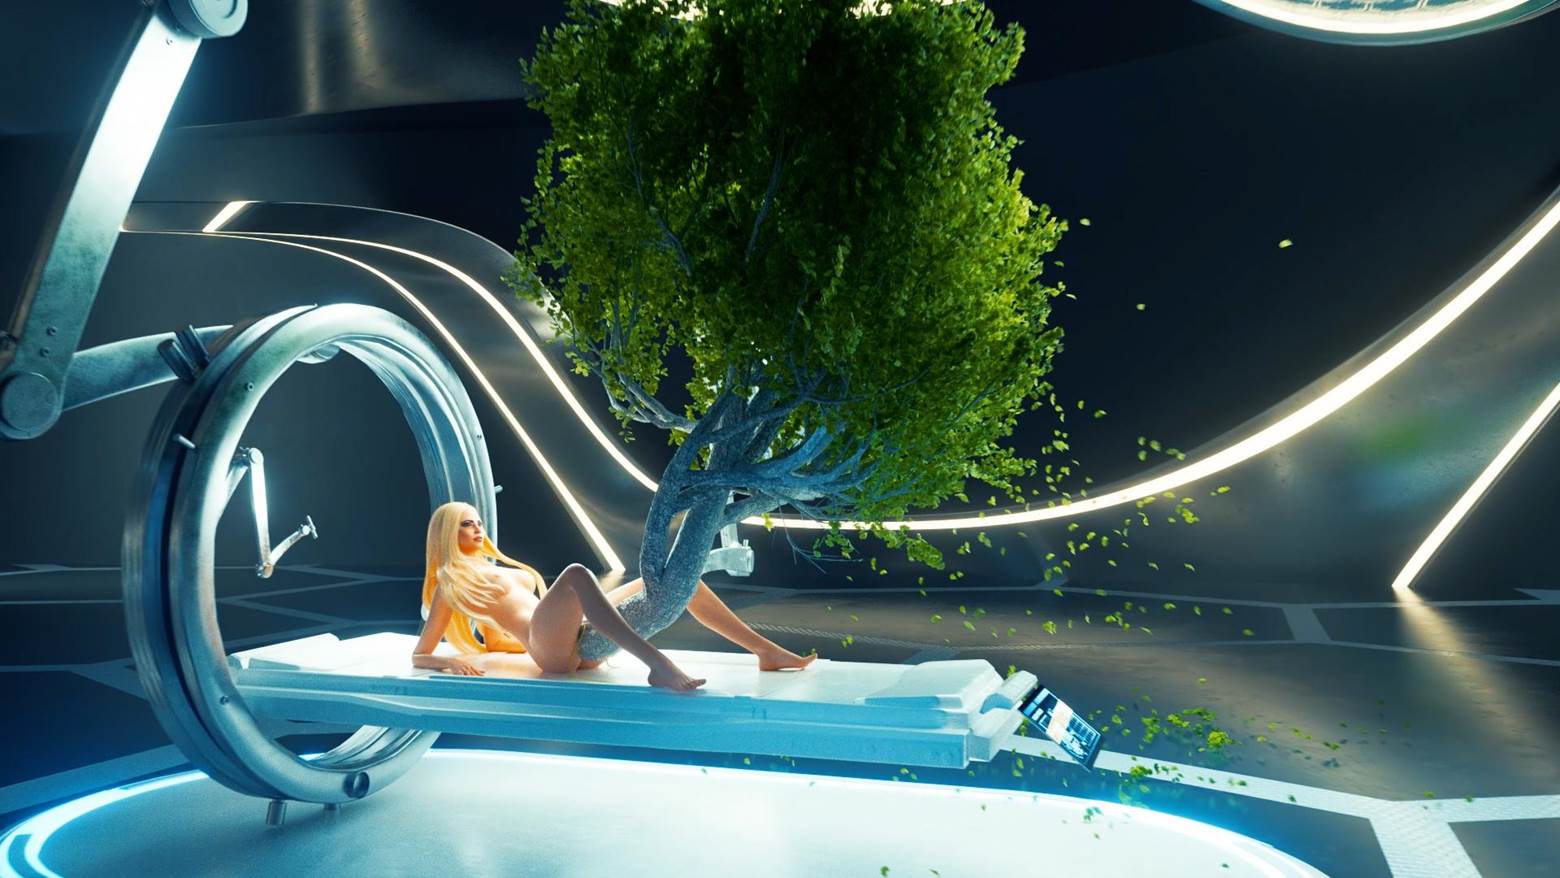 Video NFT Mother of Nature featuring a naked 3D avatar of Madonna.